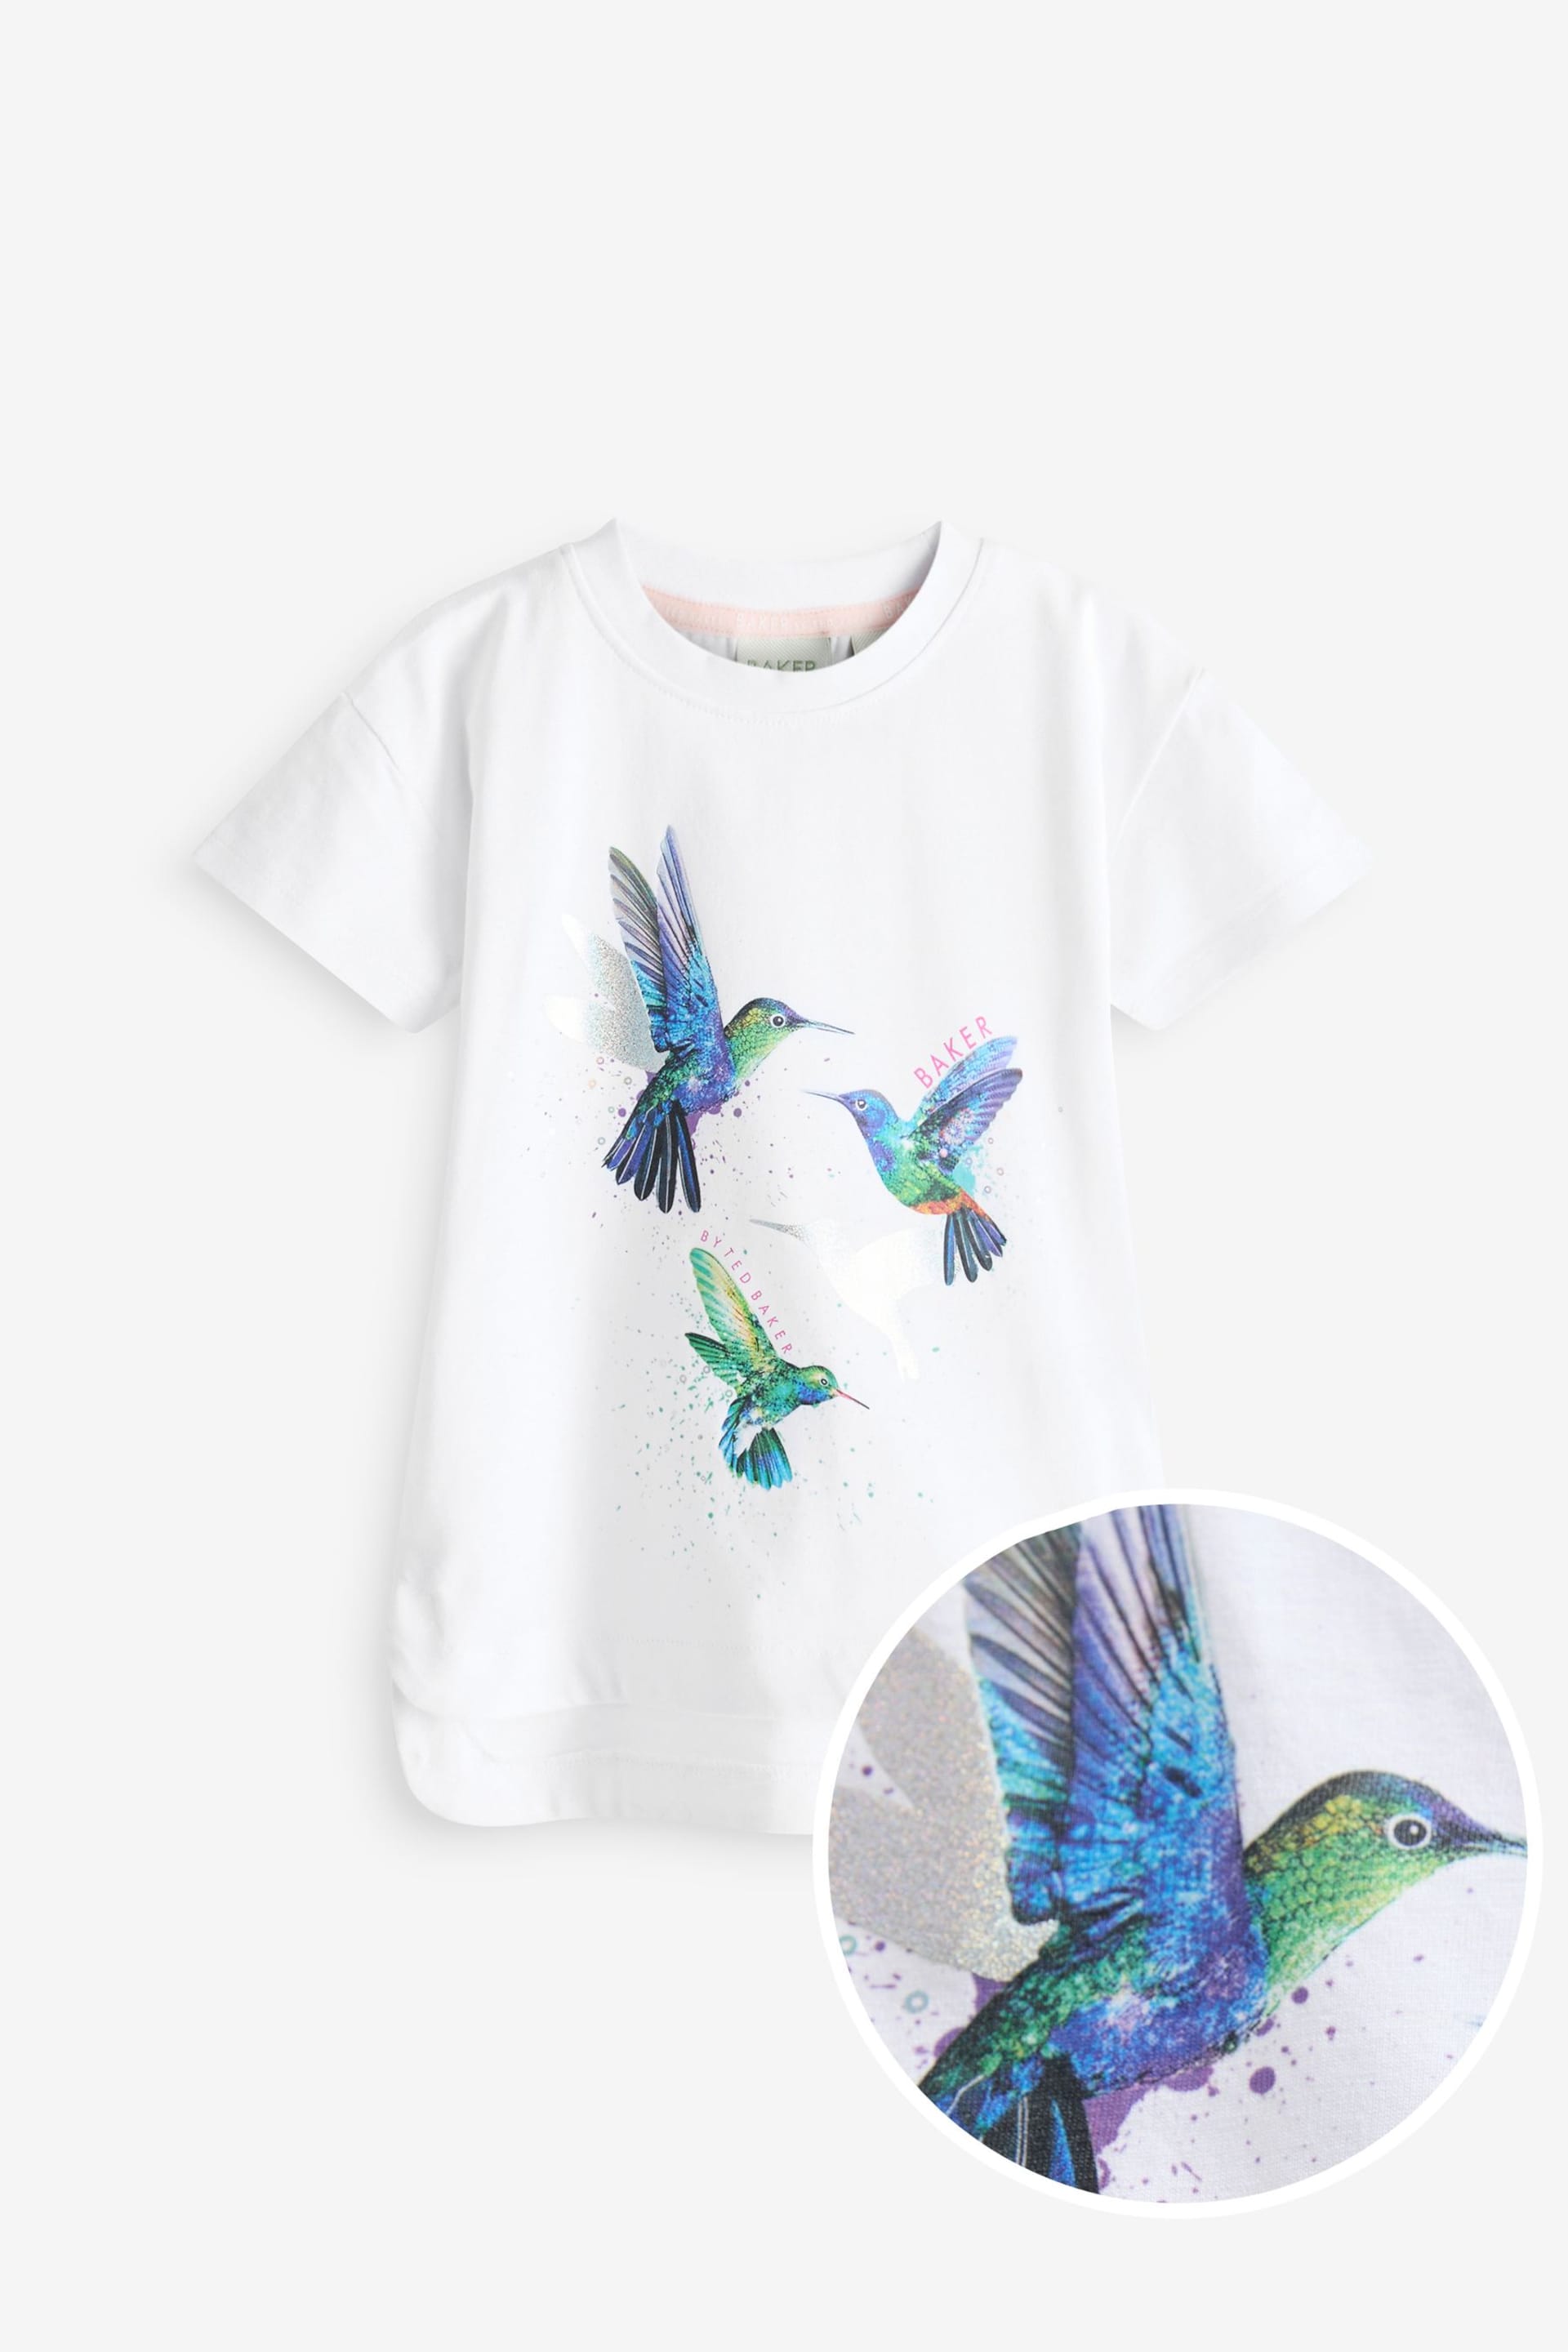 Baker by Ted Baker Graphic White T-Shirt - Image 1 of 2